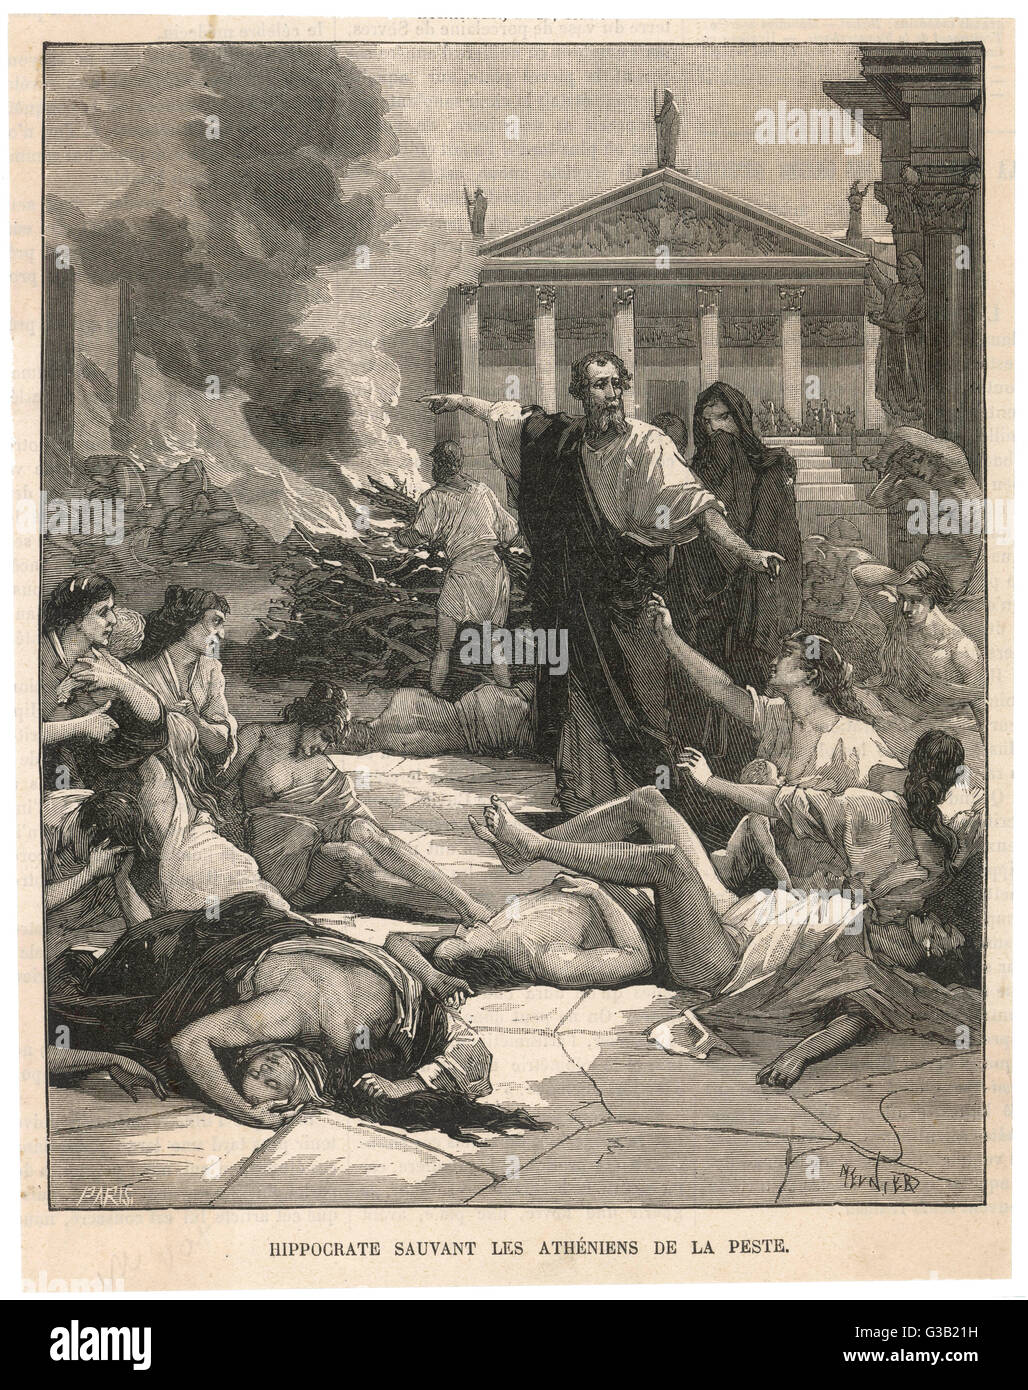 By his sensible precautions,  the Greek physician  Hippocrates saves the people  of Athens from the worst  effects of the plague which  threatens them     Date: 5th century BC Stock Photo